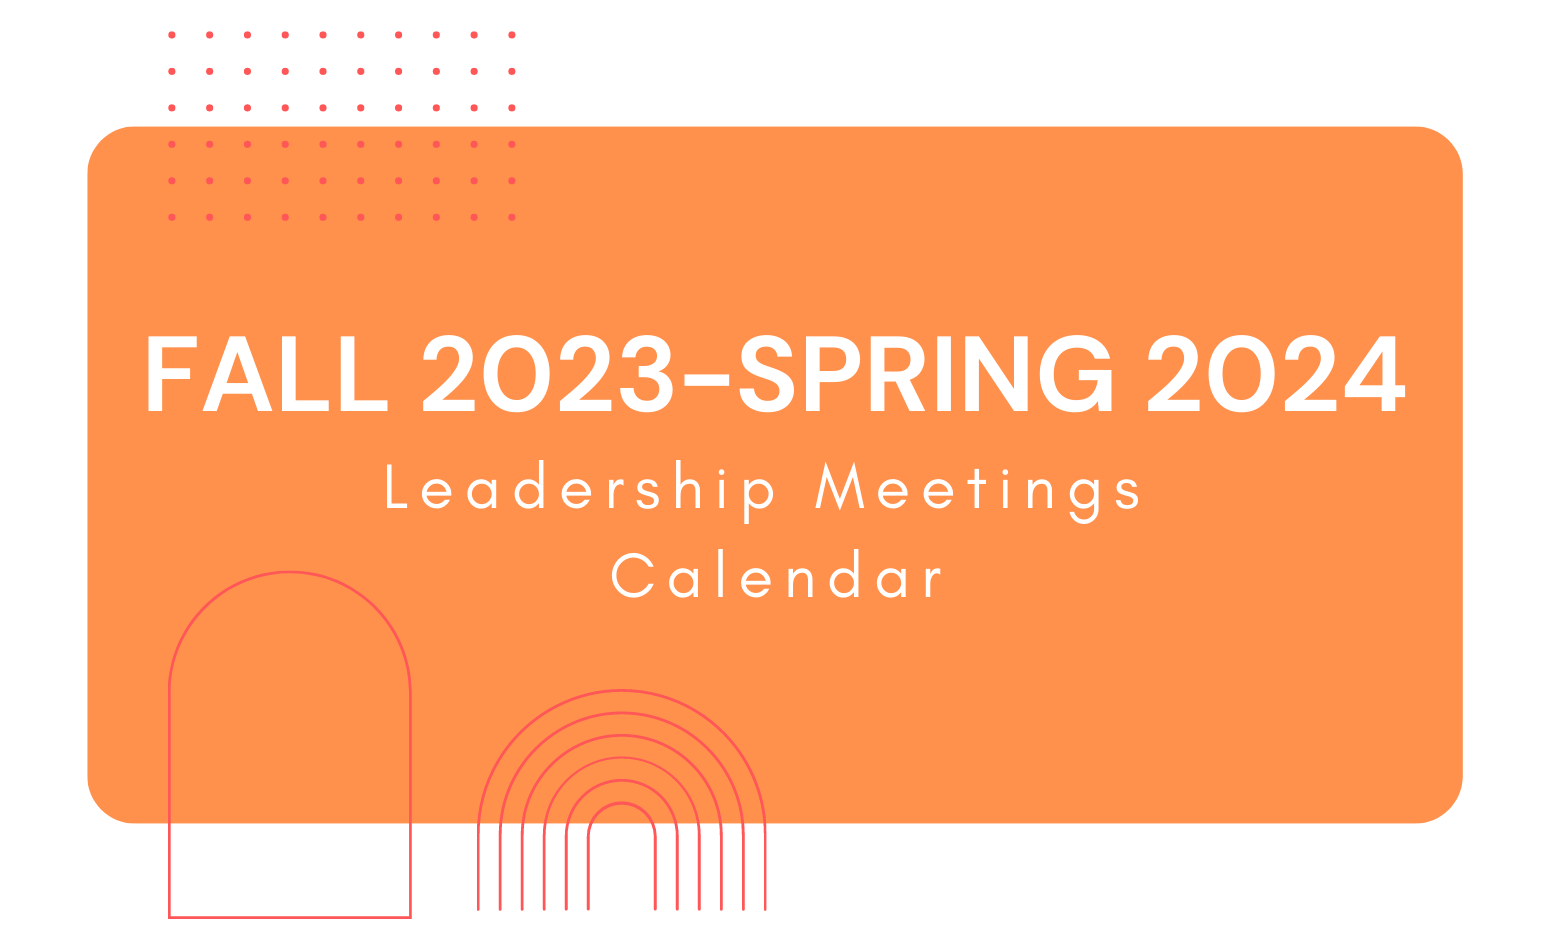 Orange background with a couple graphic shapes. White text states "Fall 2023-Spring 2024 leadership Meetings Calendar"